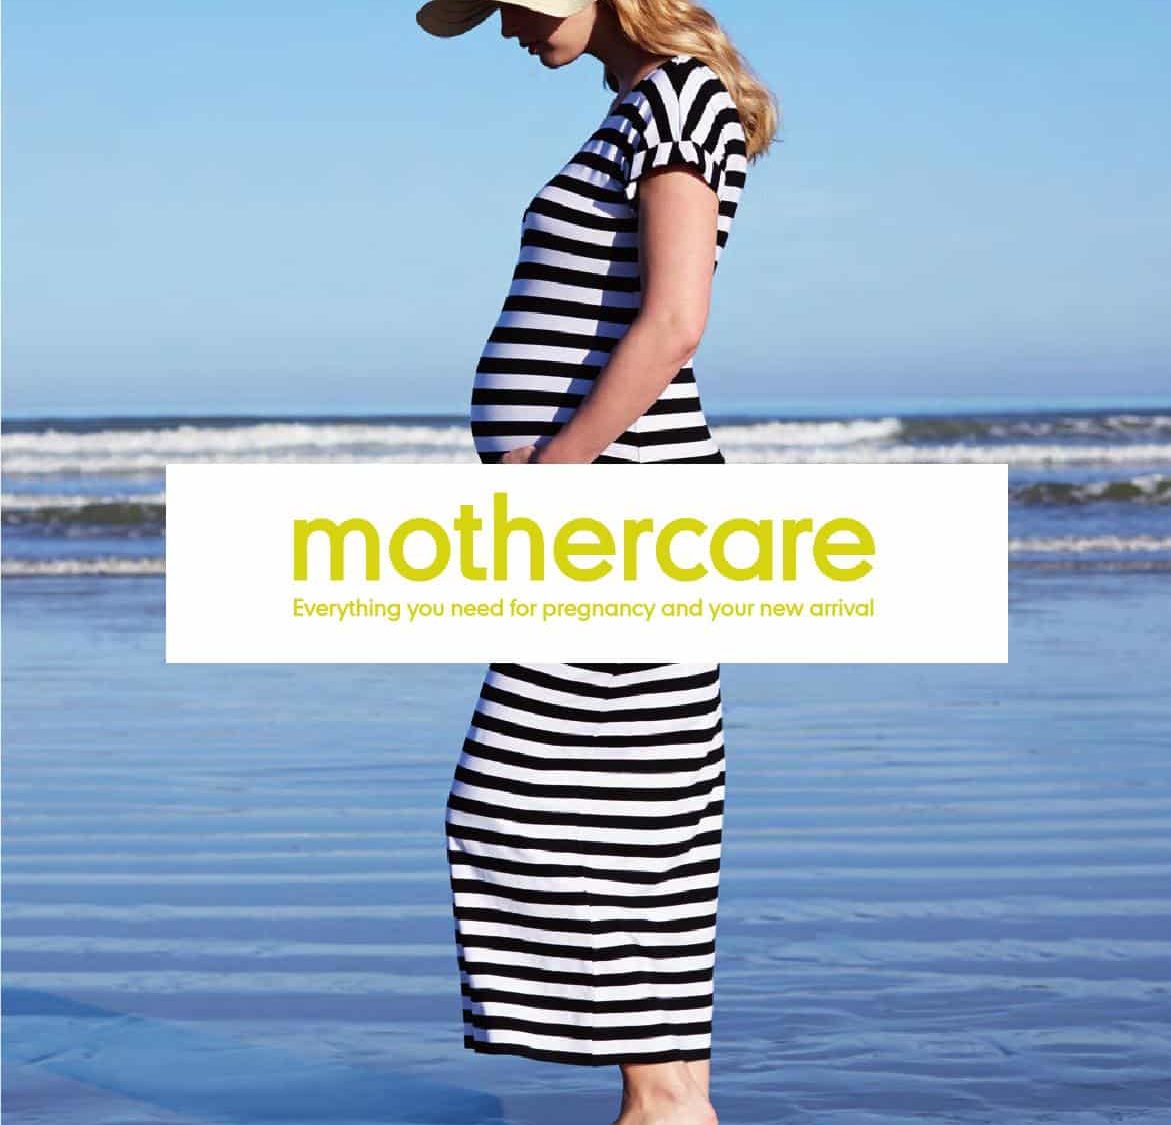 Mothercare CFO to move on